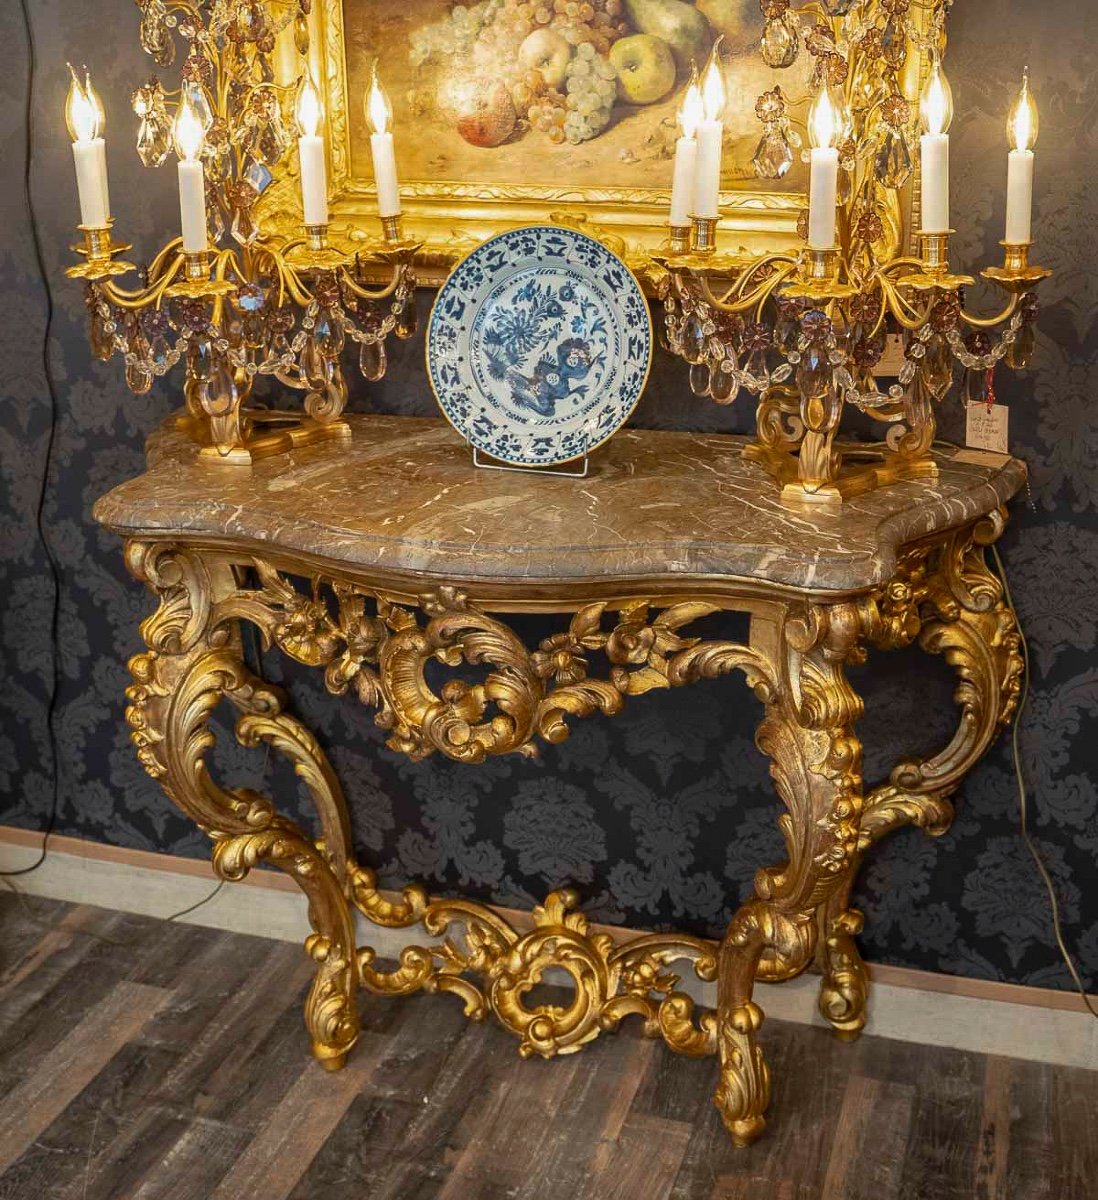 Carved Openwork And Gilded Wood Console With Rocaille Decoration, Italy, Late 18th Century-photo-3